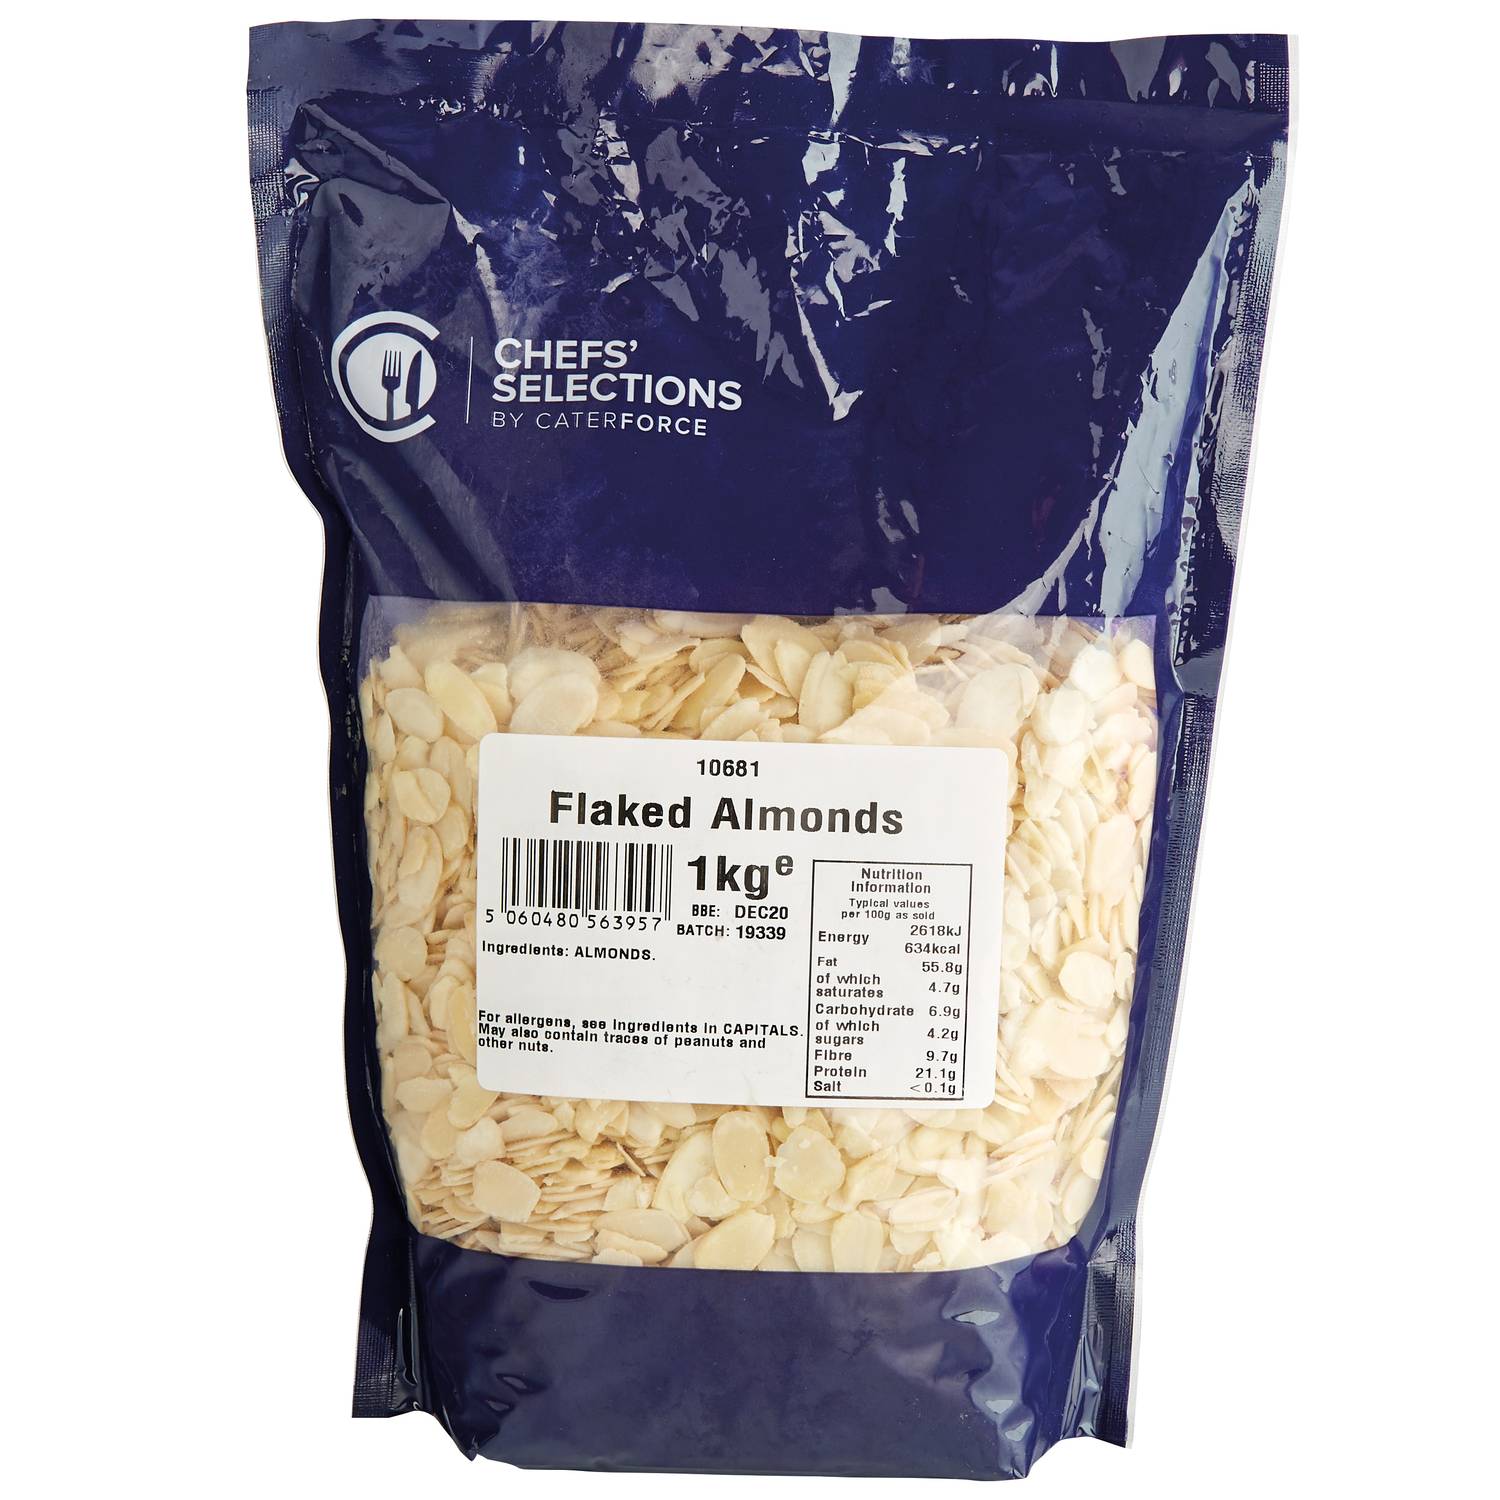 Chefs’ Selections Flaked Almond (6 x 1kg)